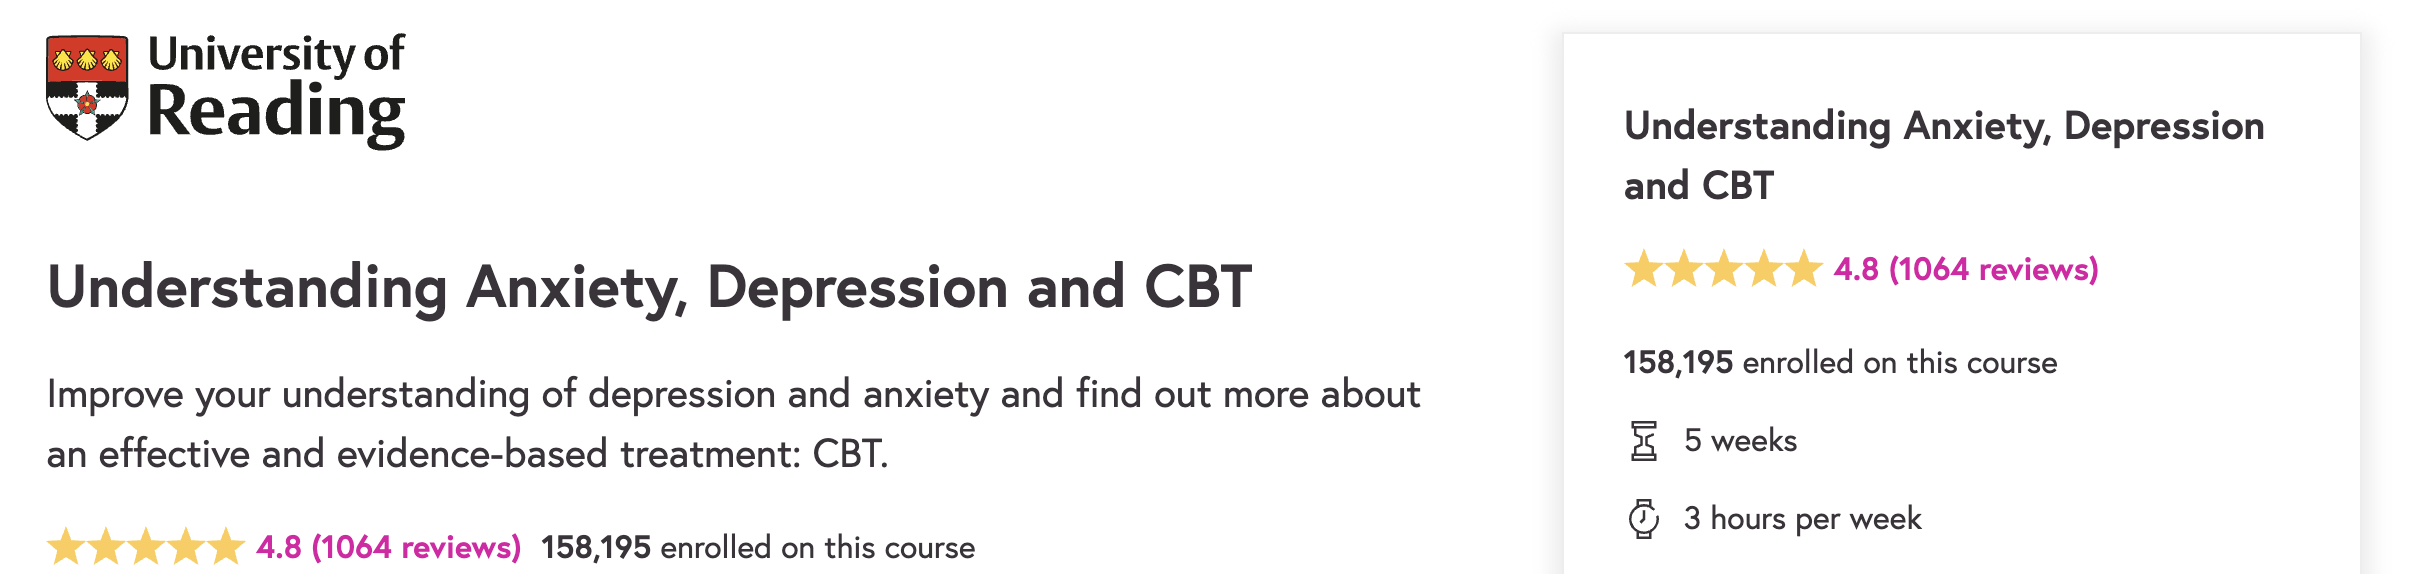 Understanding Anxiety, Depression, and CBT